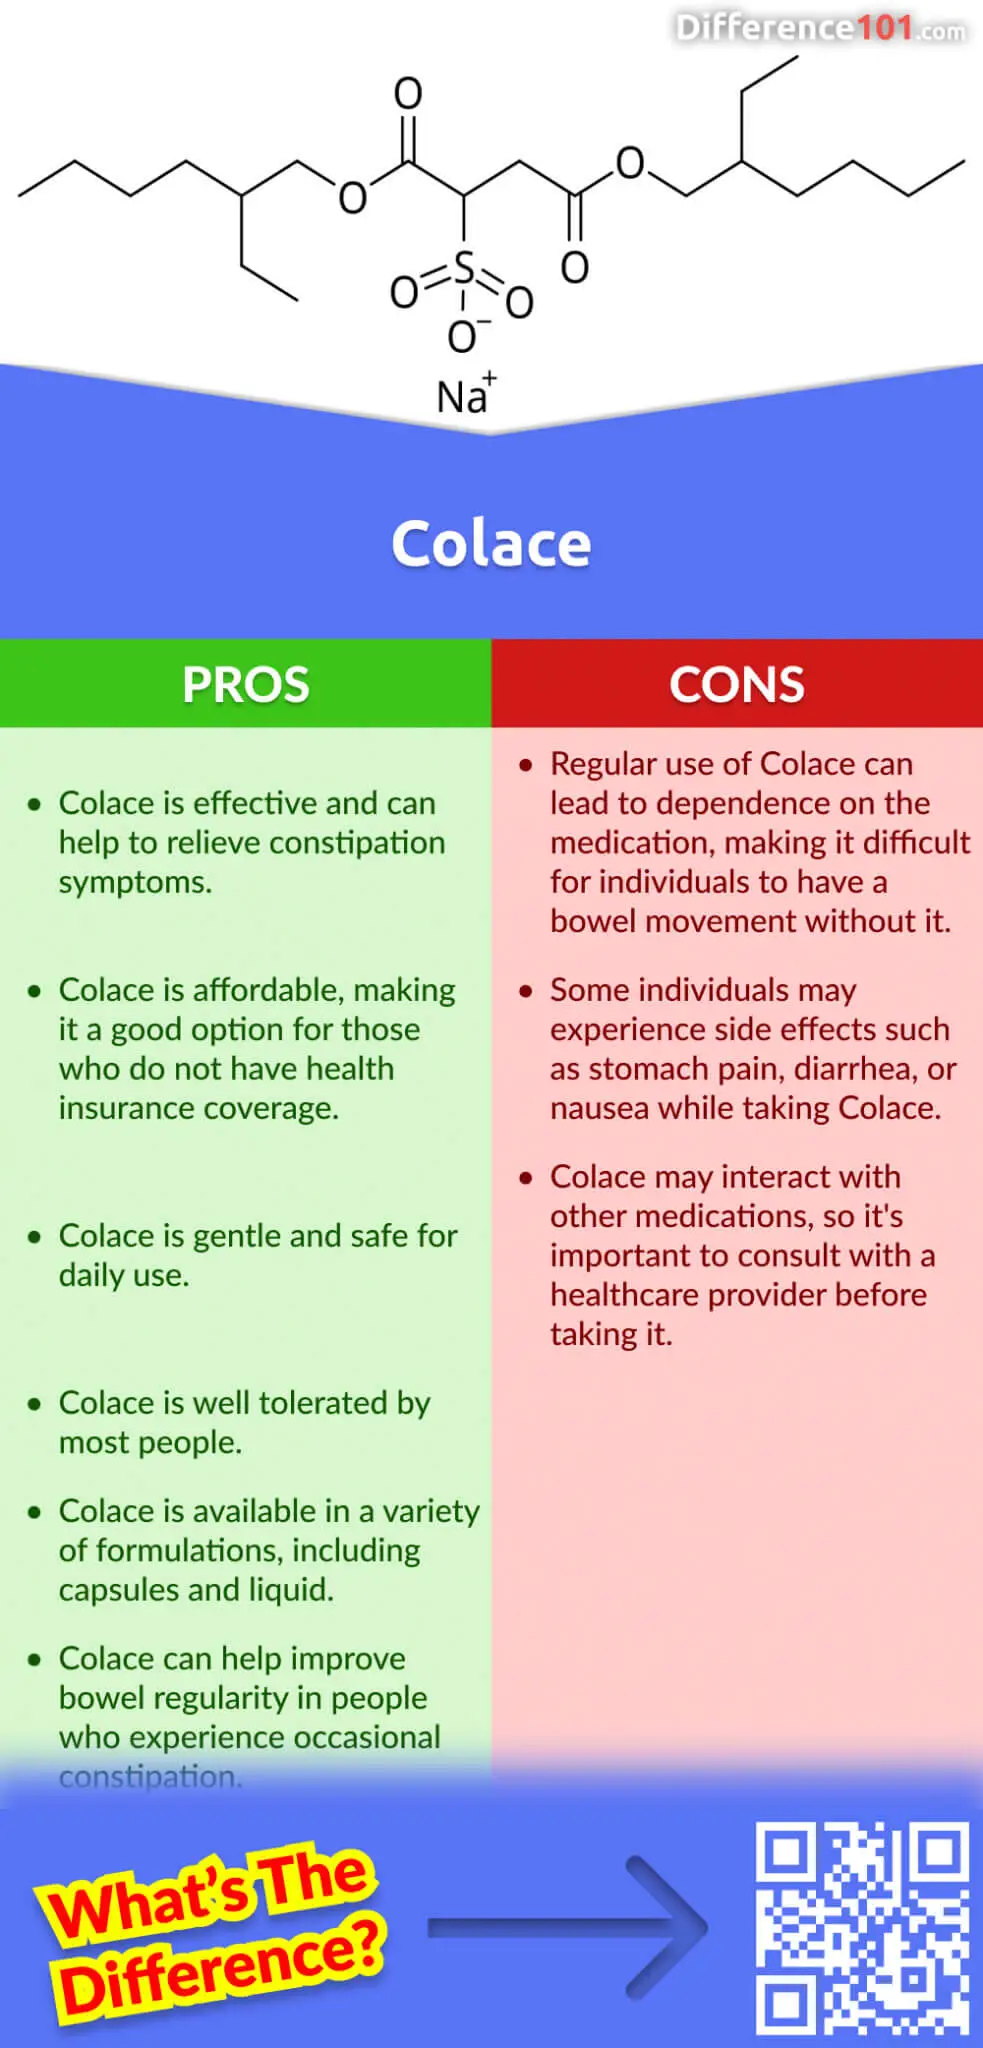 Colace Pros & Cons
